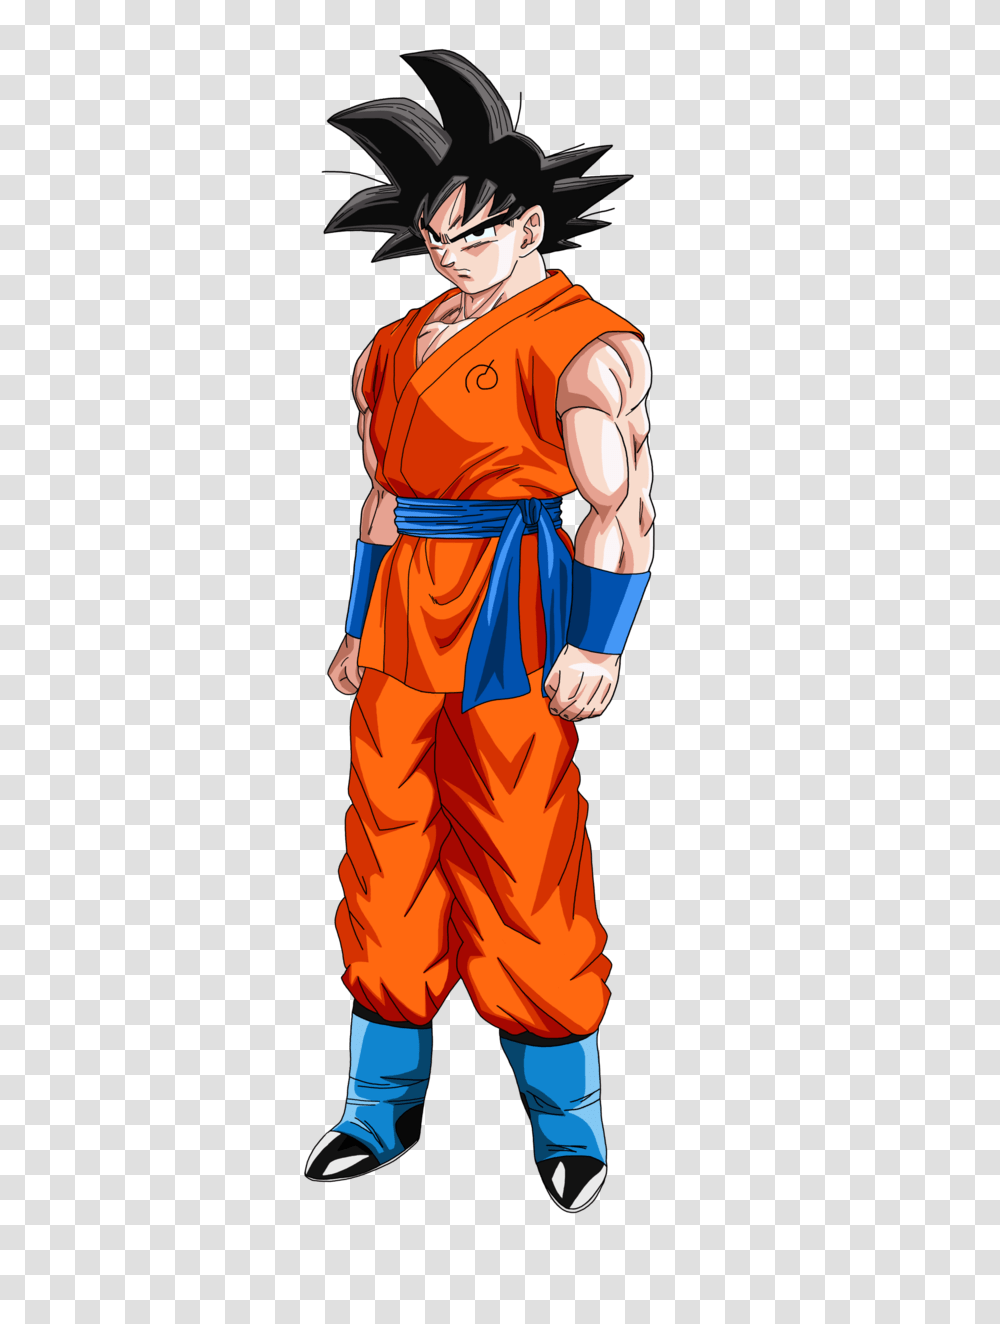 Im Sorry But I Hate Super Saiyan God Characterrant, Person, Human, Costume, Performer Transparent Png